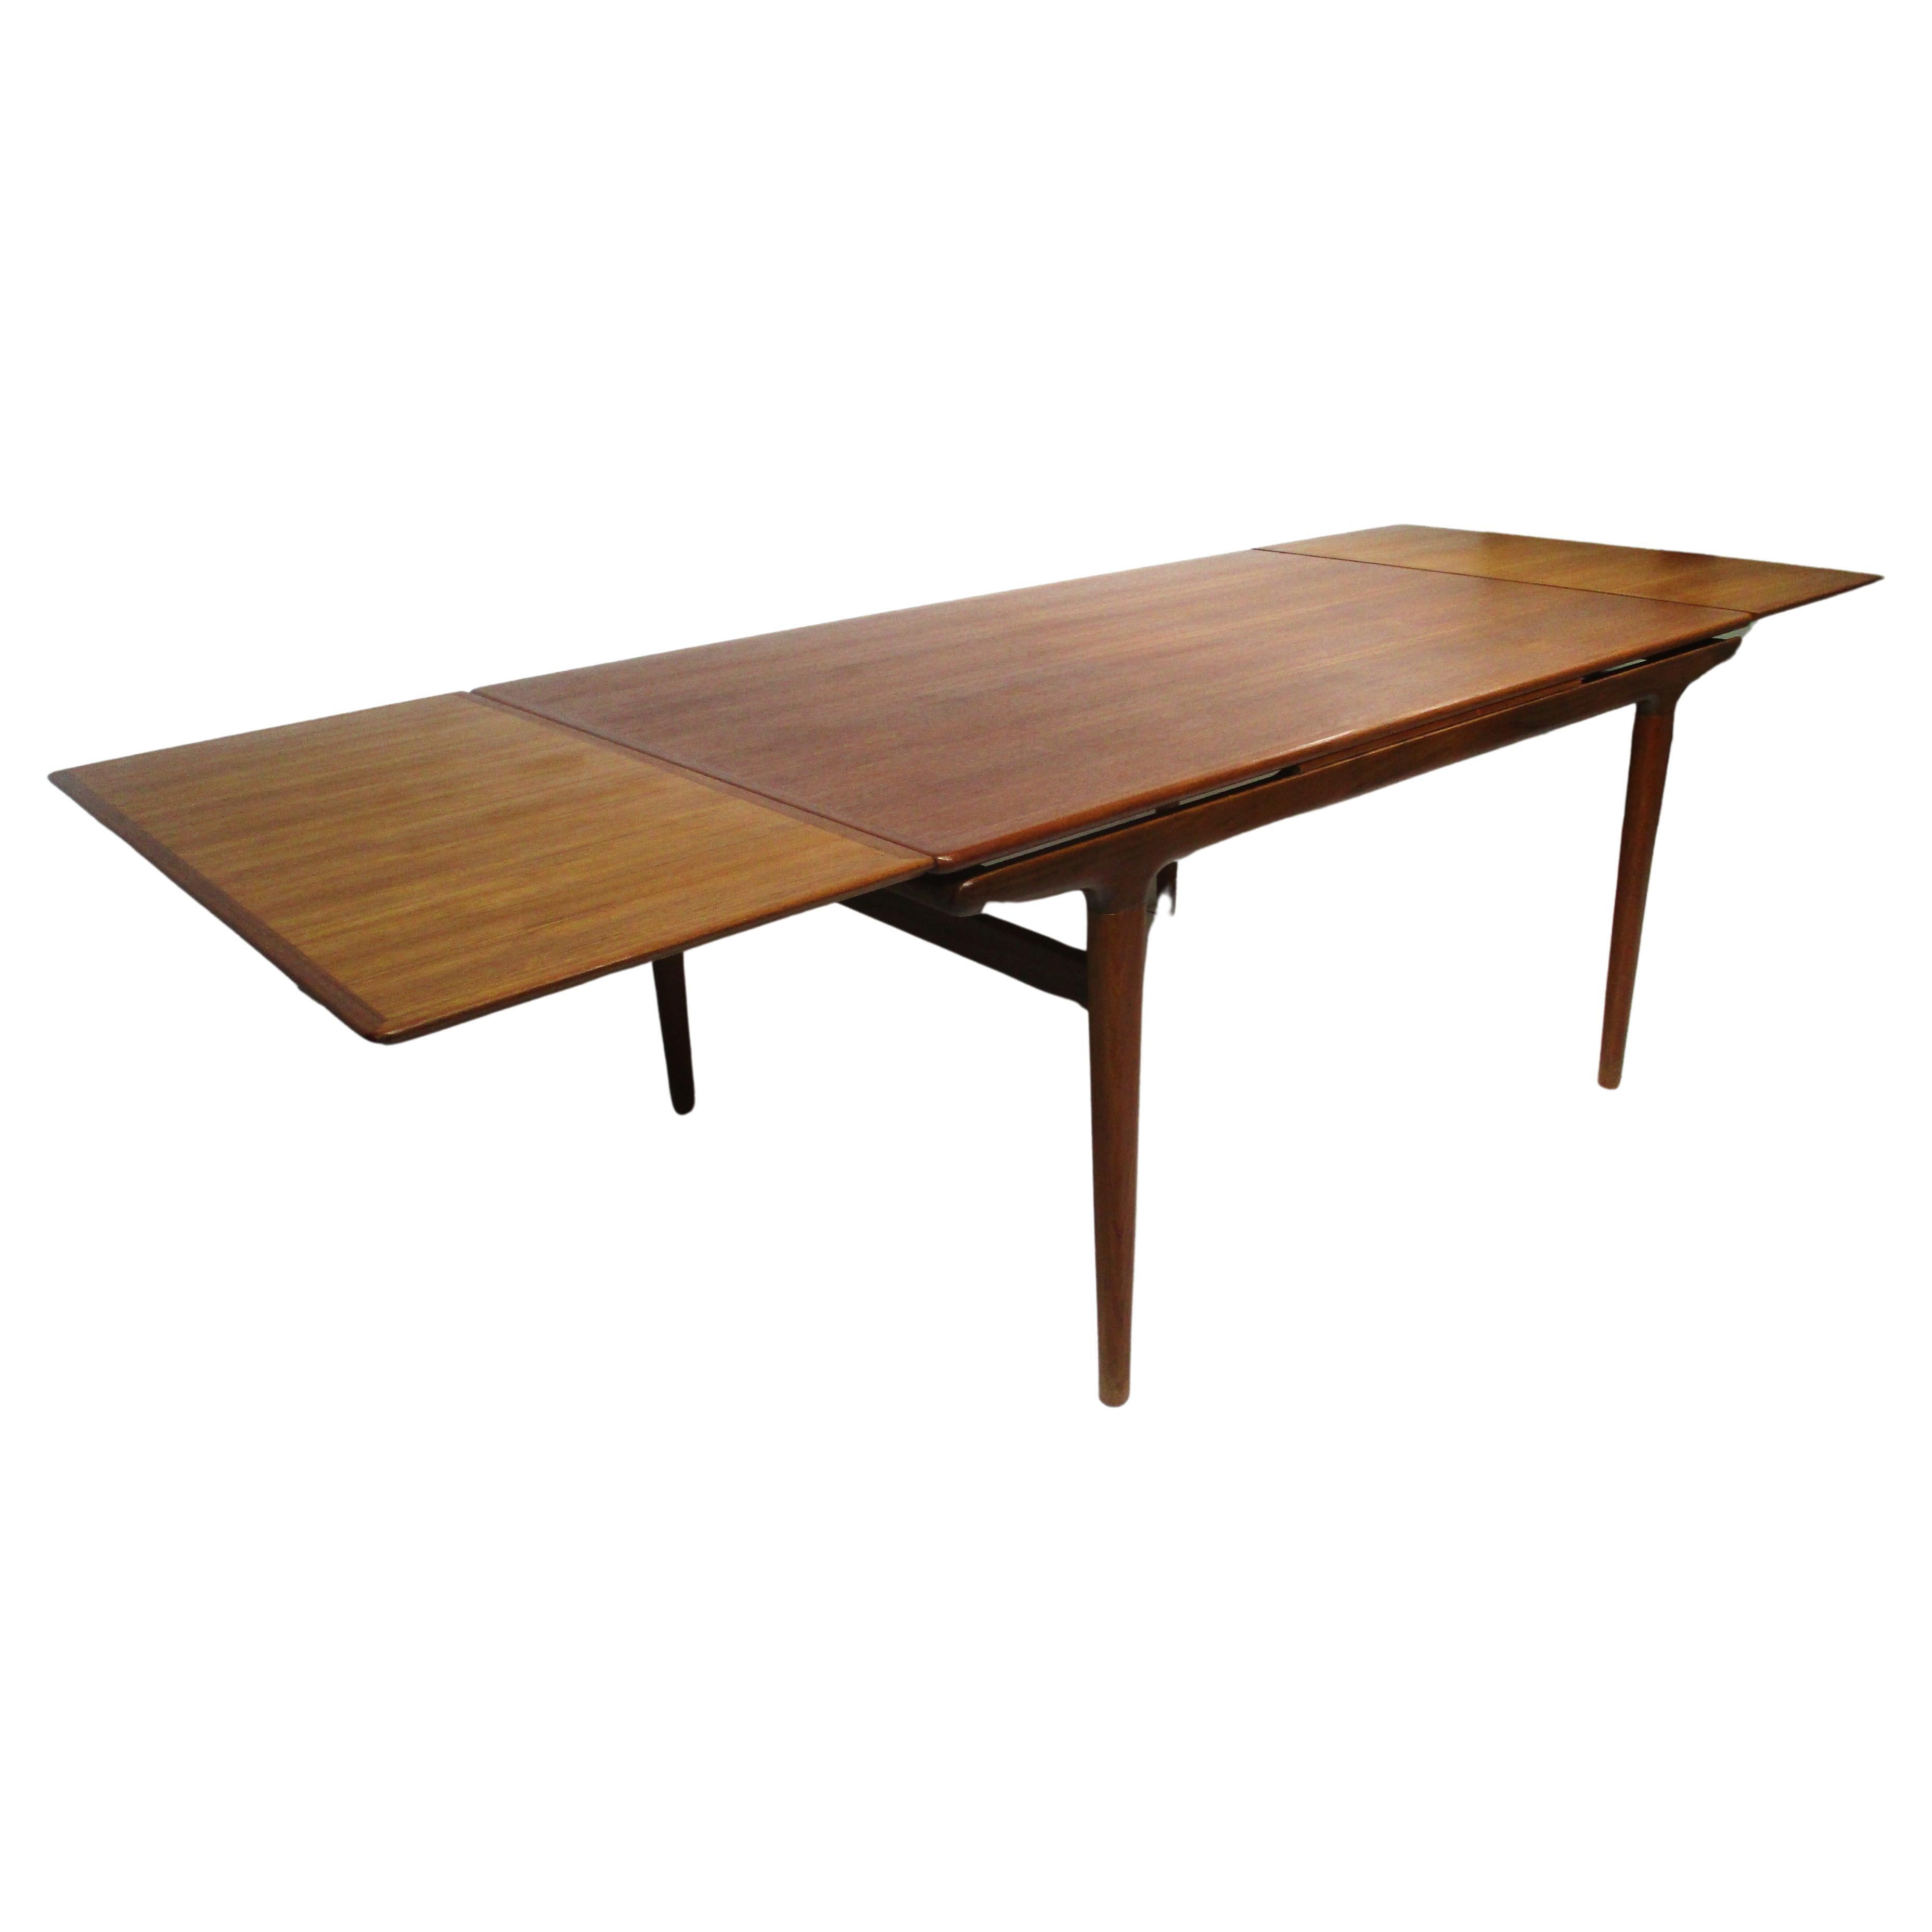 A very well crafted early Mid Century teak wood dining table with two 19.75